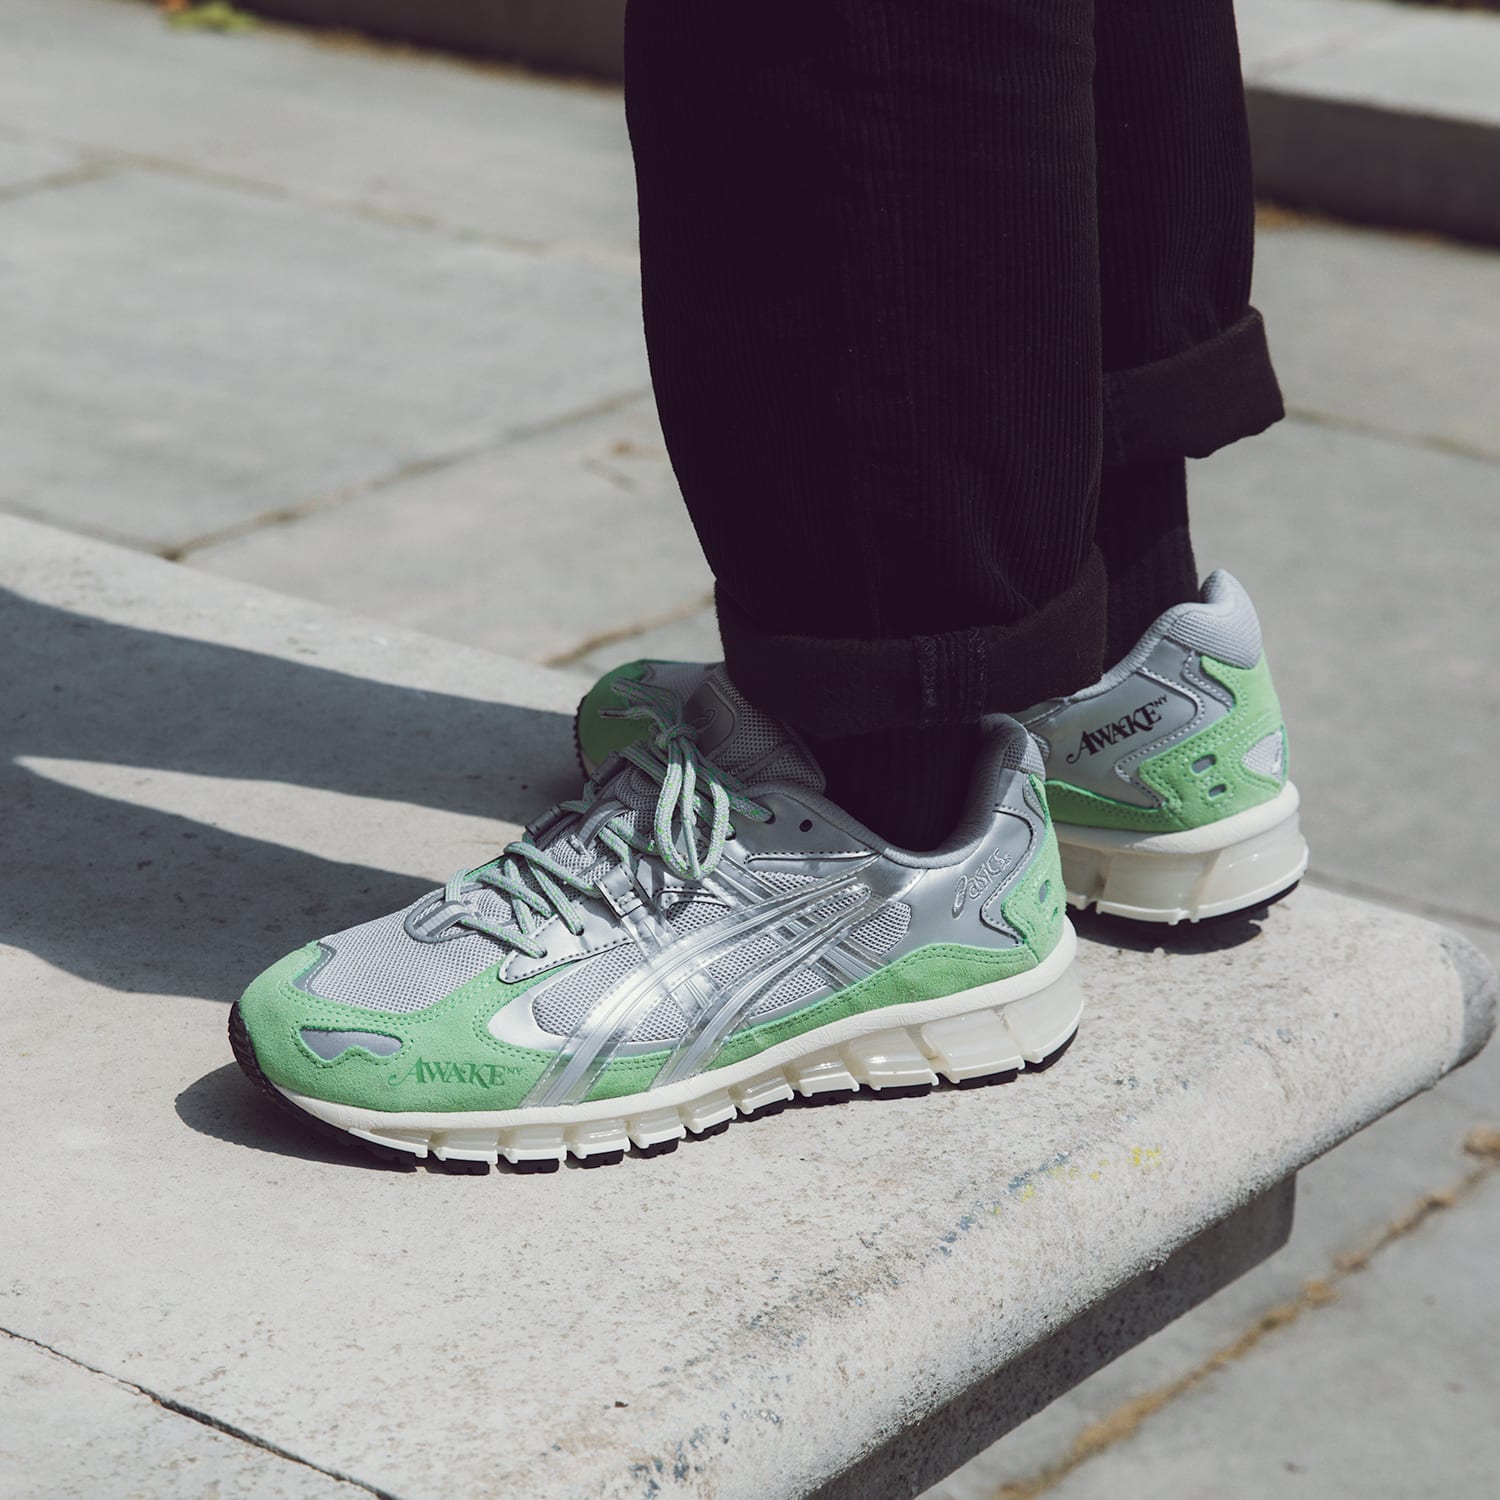 AWAKE NY Founder Angelo Baque on Creating His Brand's First Collab Shoe  With ASICS | Complex UK